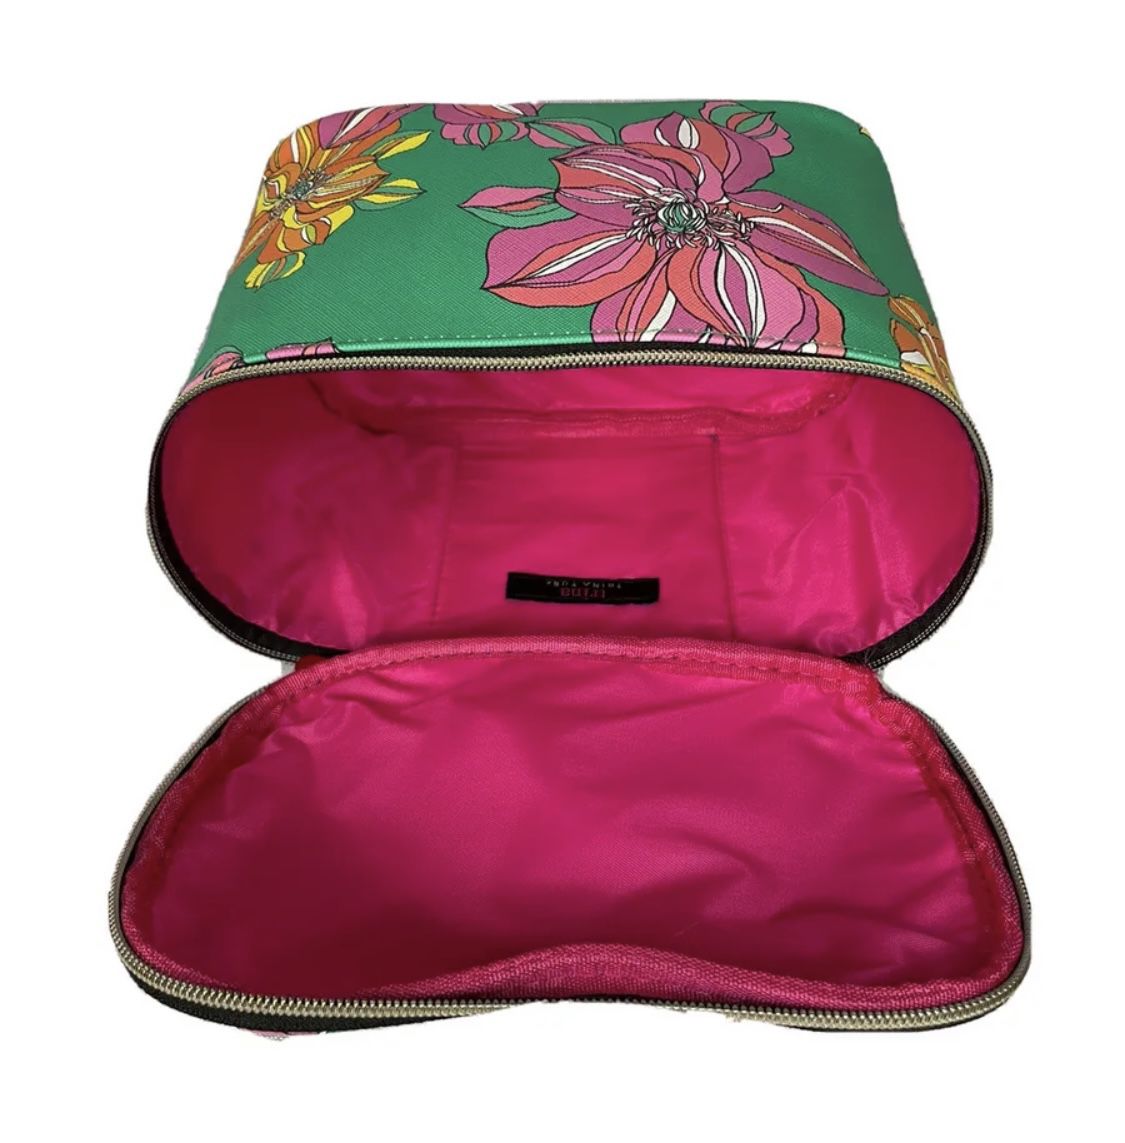 TRINA TURK Makeup Bag Cosmetic Travel Case for Sale in